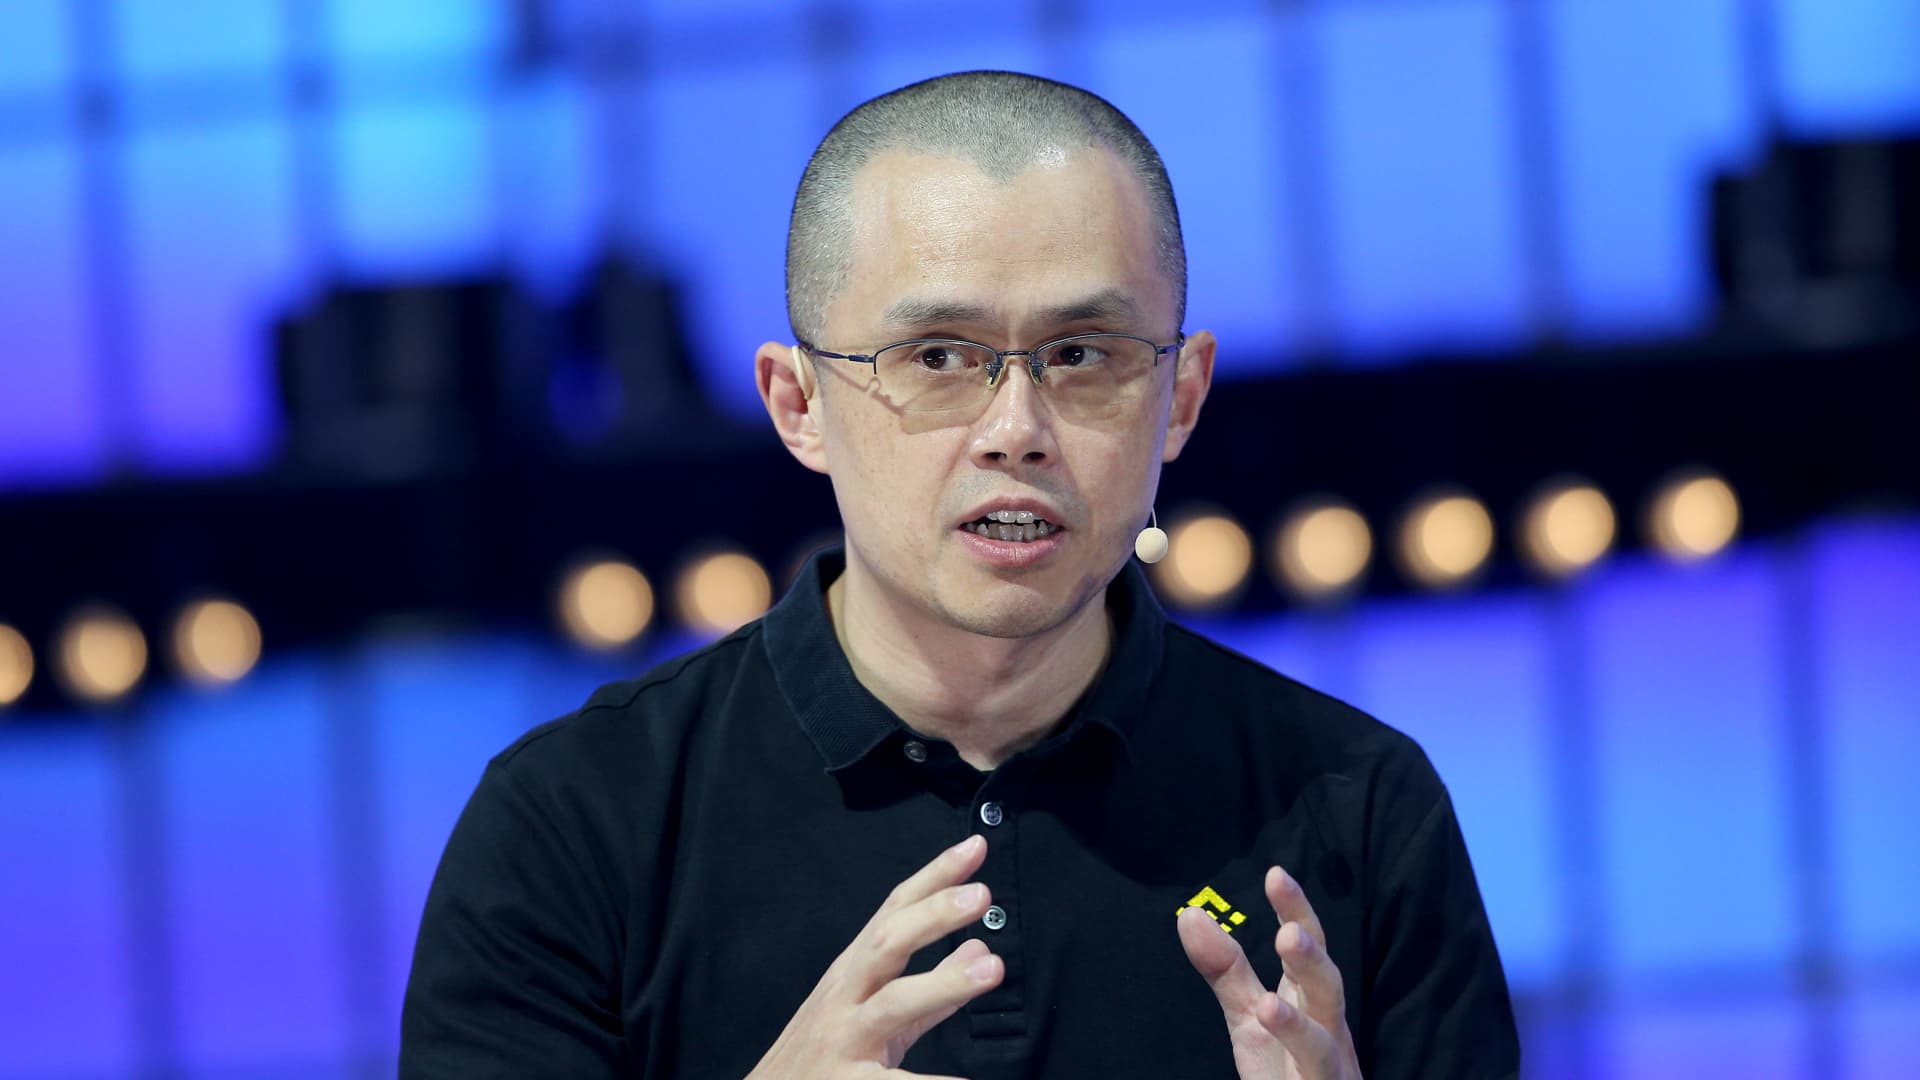 binance-deploys-usd1-billion-to-keep-crypto-industry-afloat-after-ftx-collapse